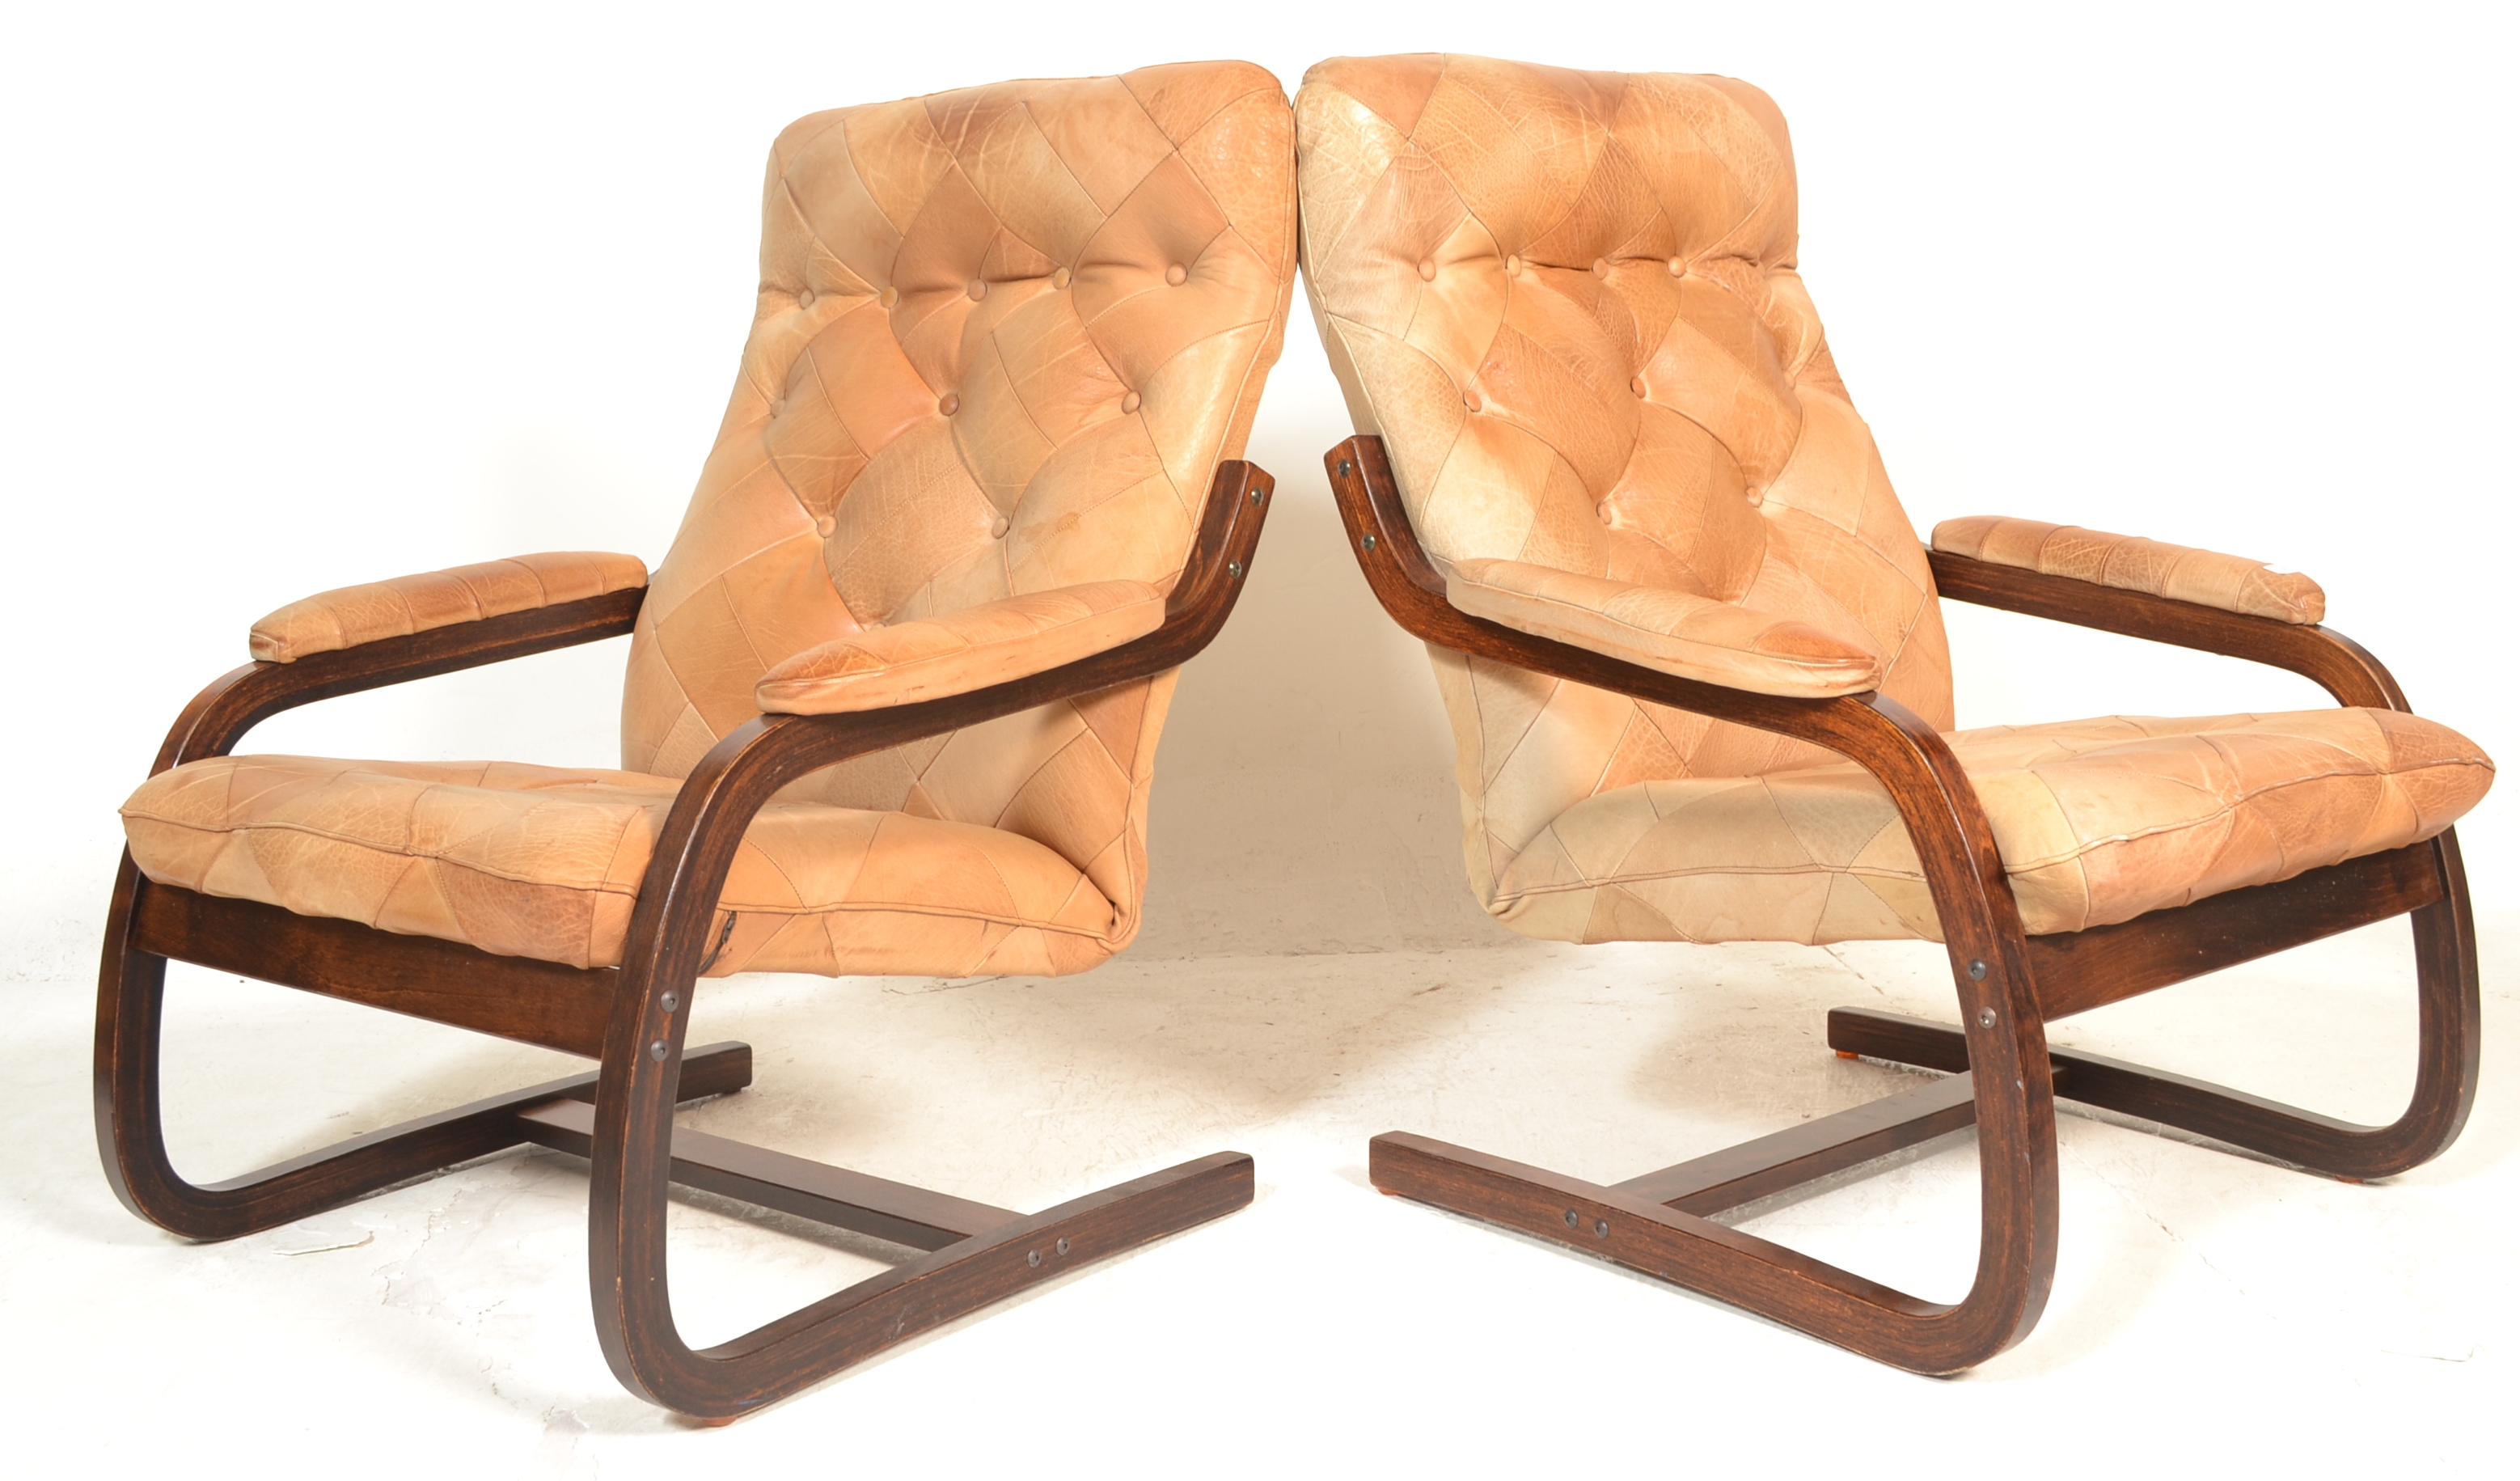 PAIR OF VINTAGE 1970'S DANISH RETRO LEATHER SLING ARM CHAIRS